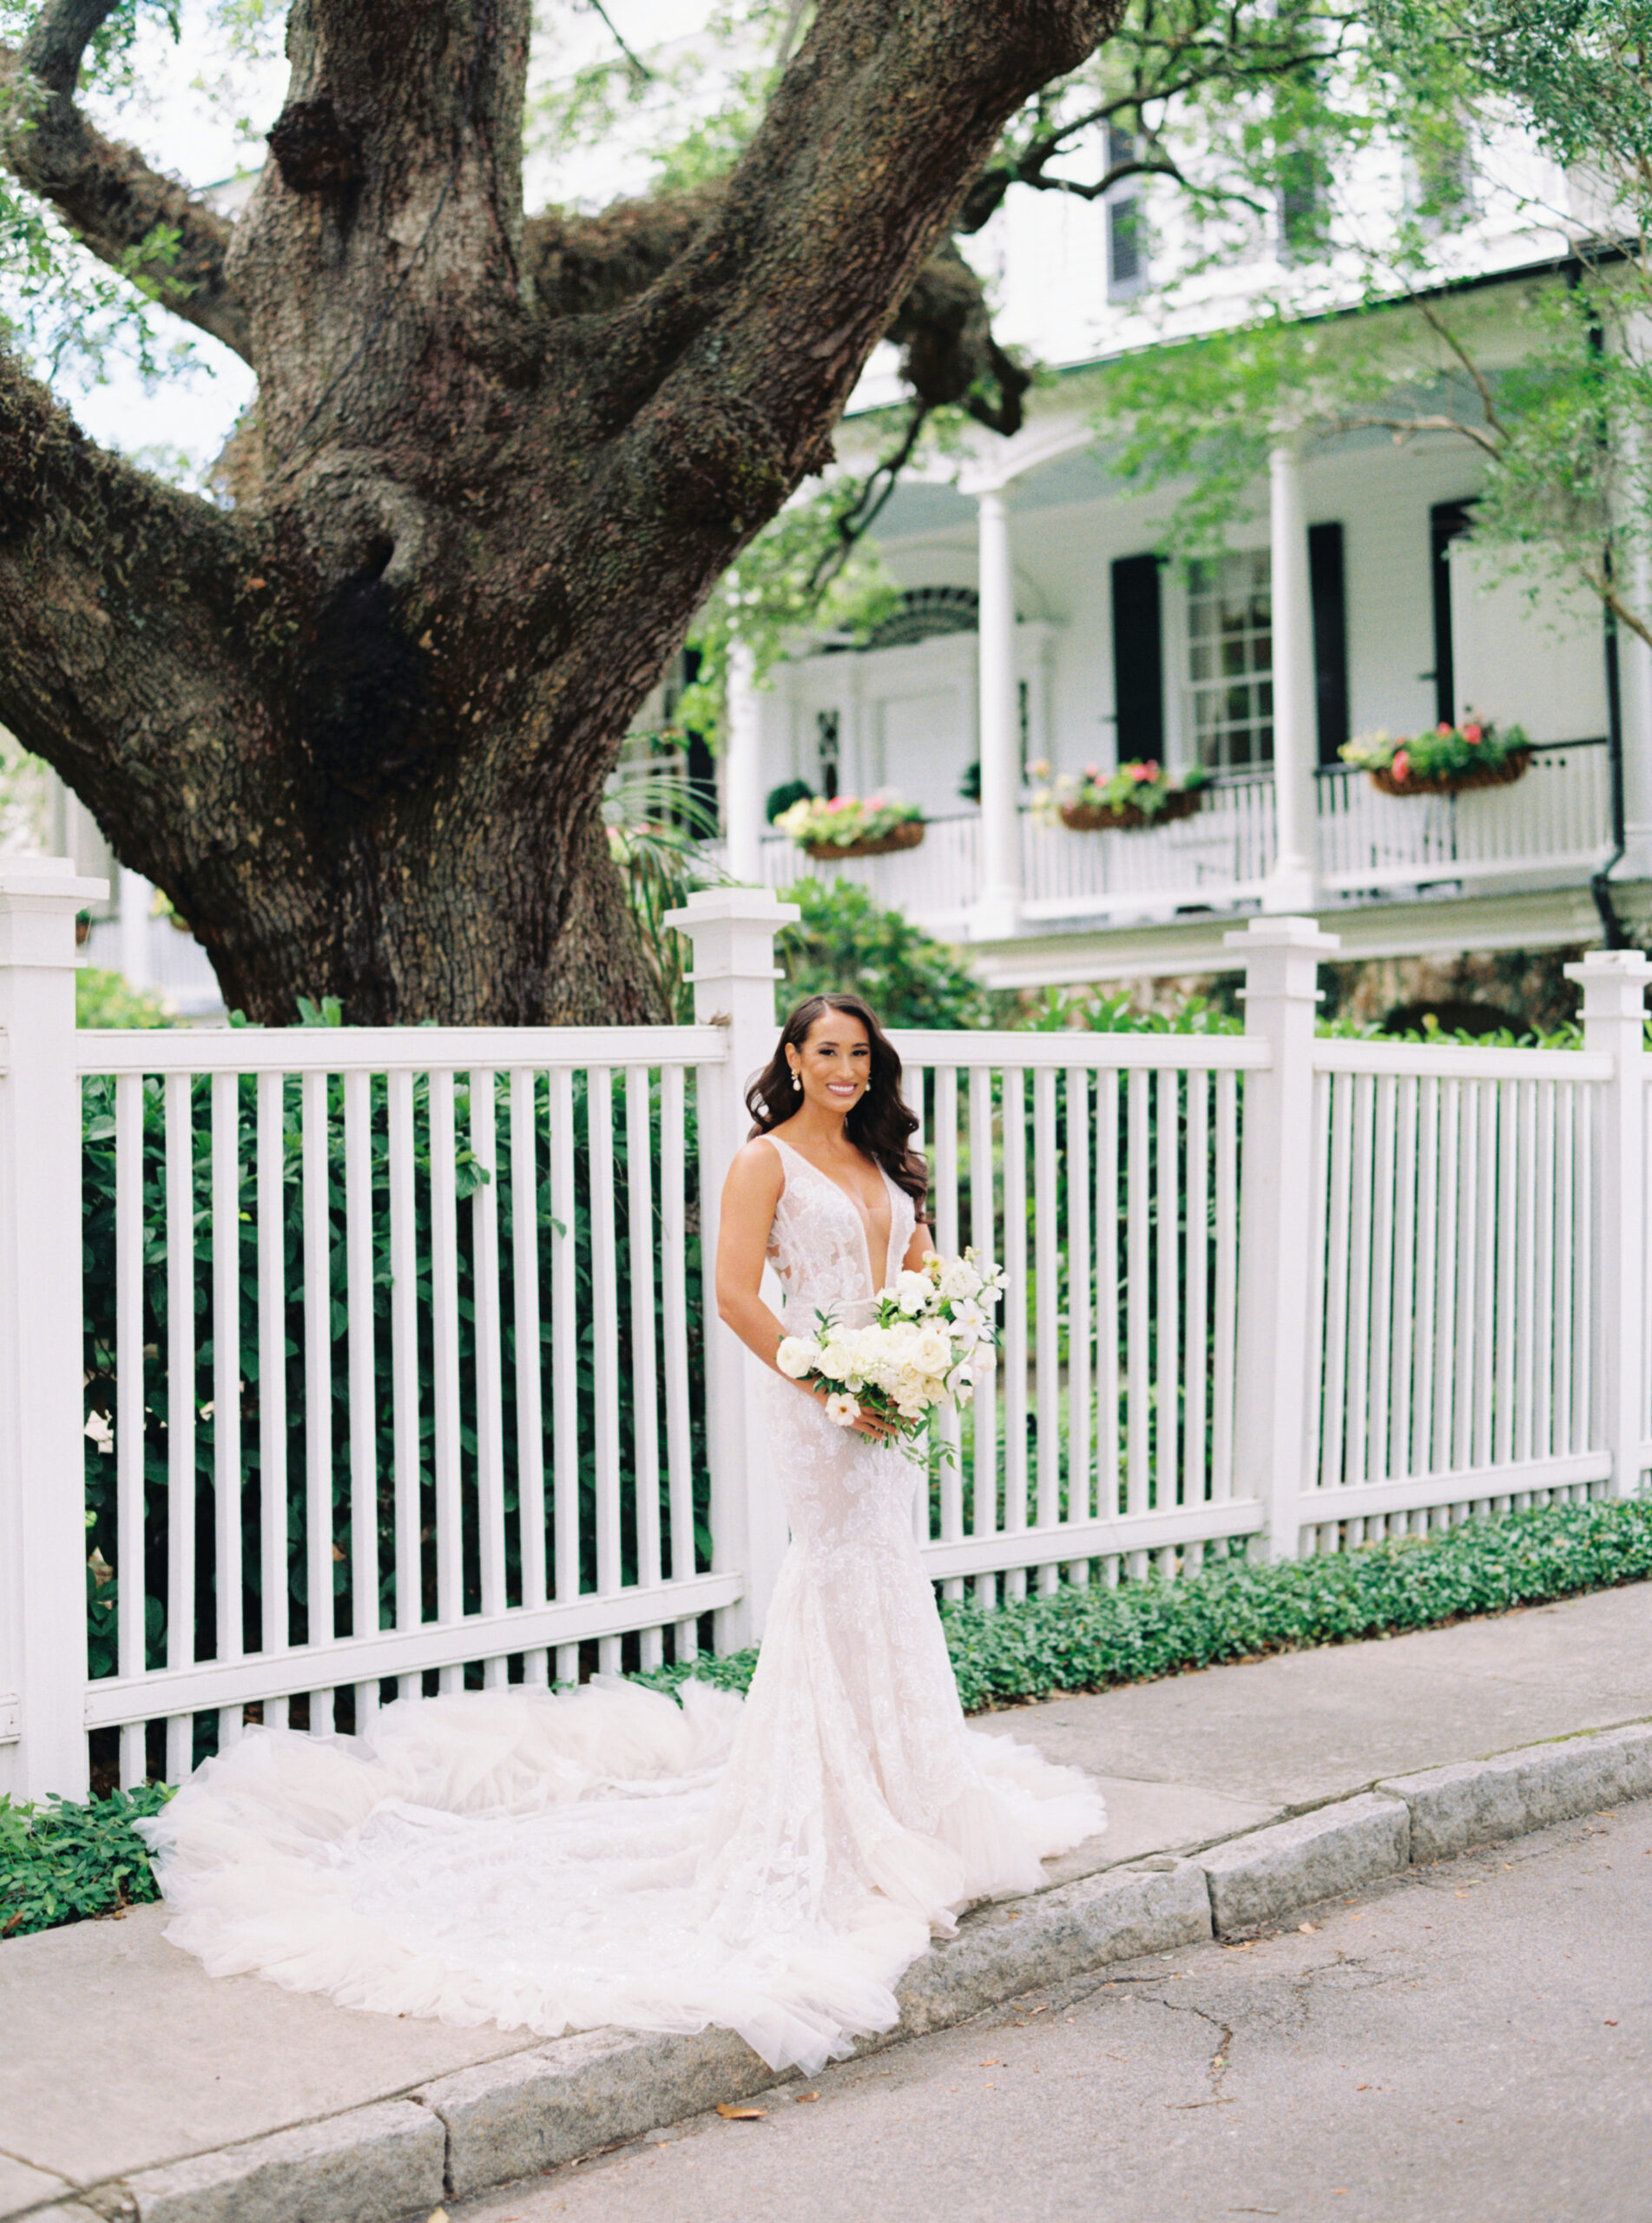 Film photo wedding photographer. Bride standing on the sidewalk in front of white fence.